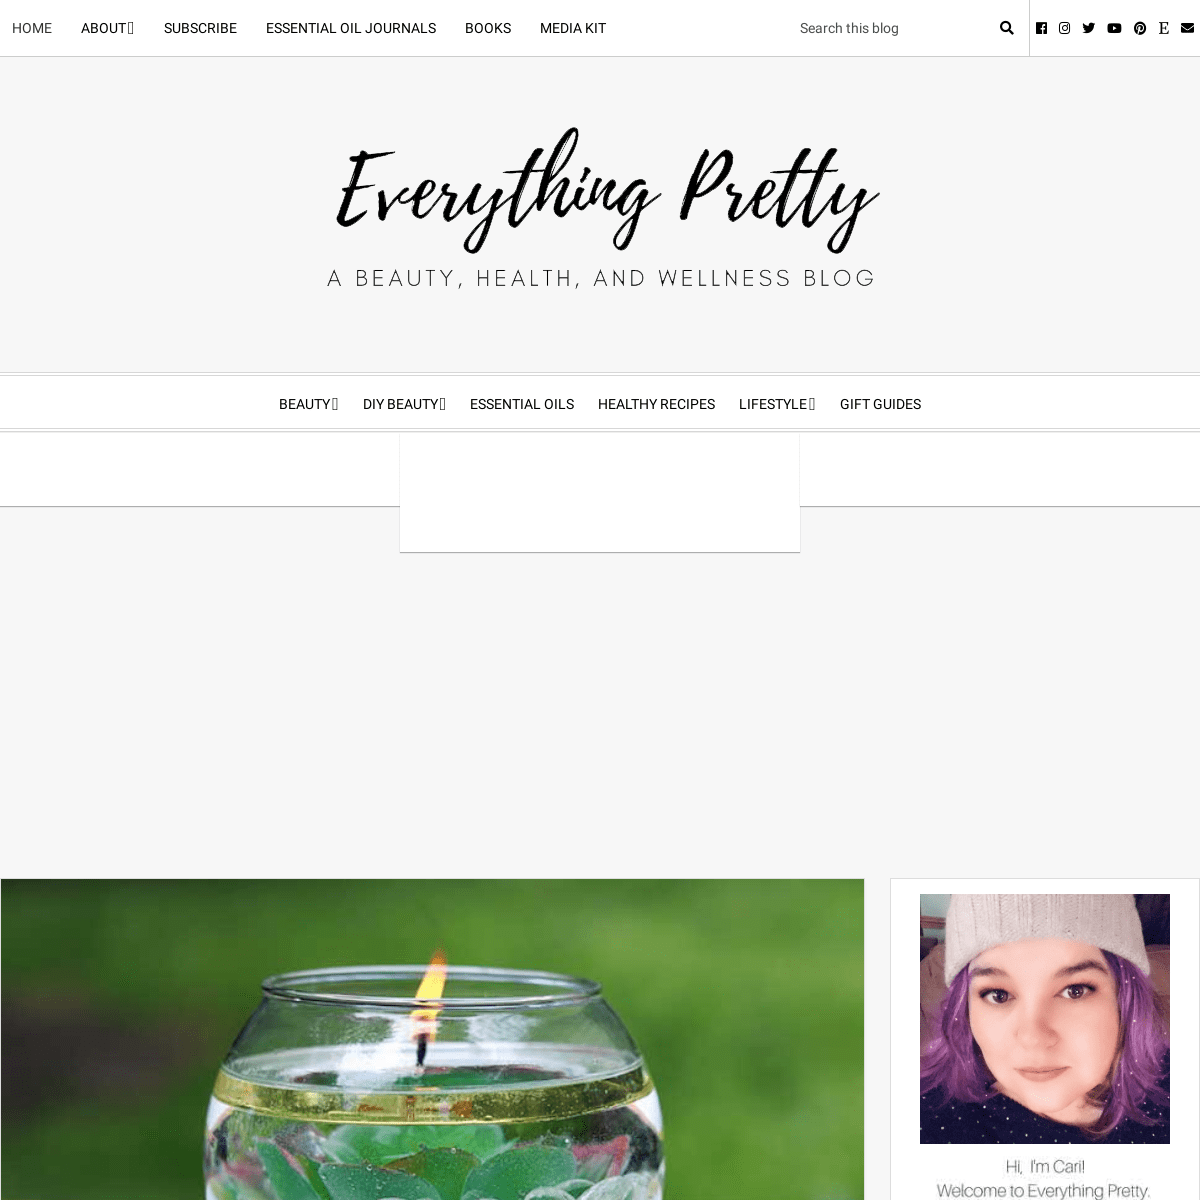 A complete backup of https://yourbeautyblog.com